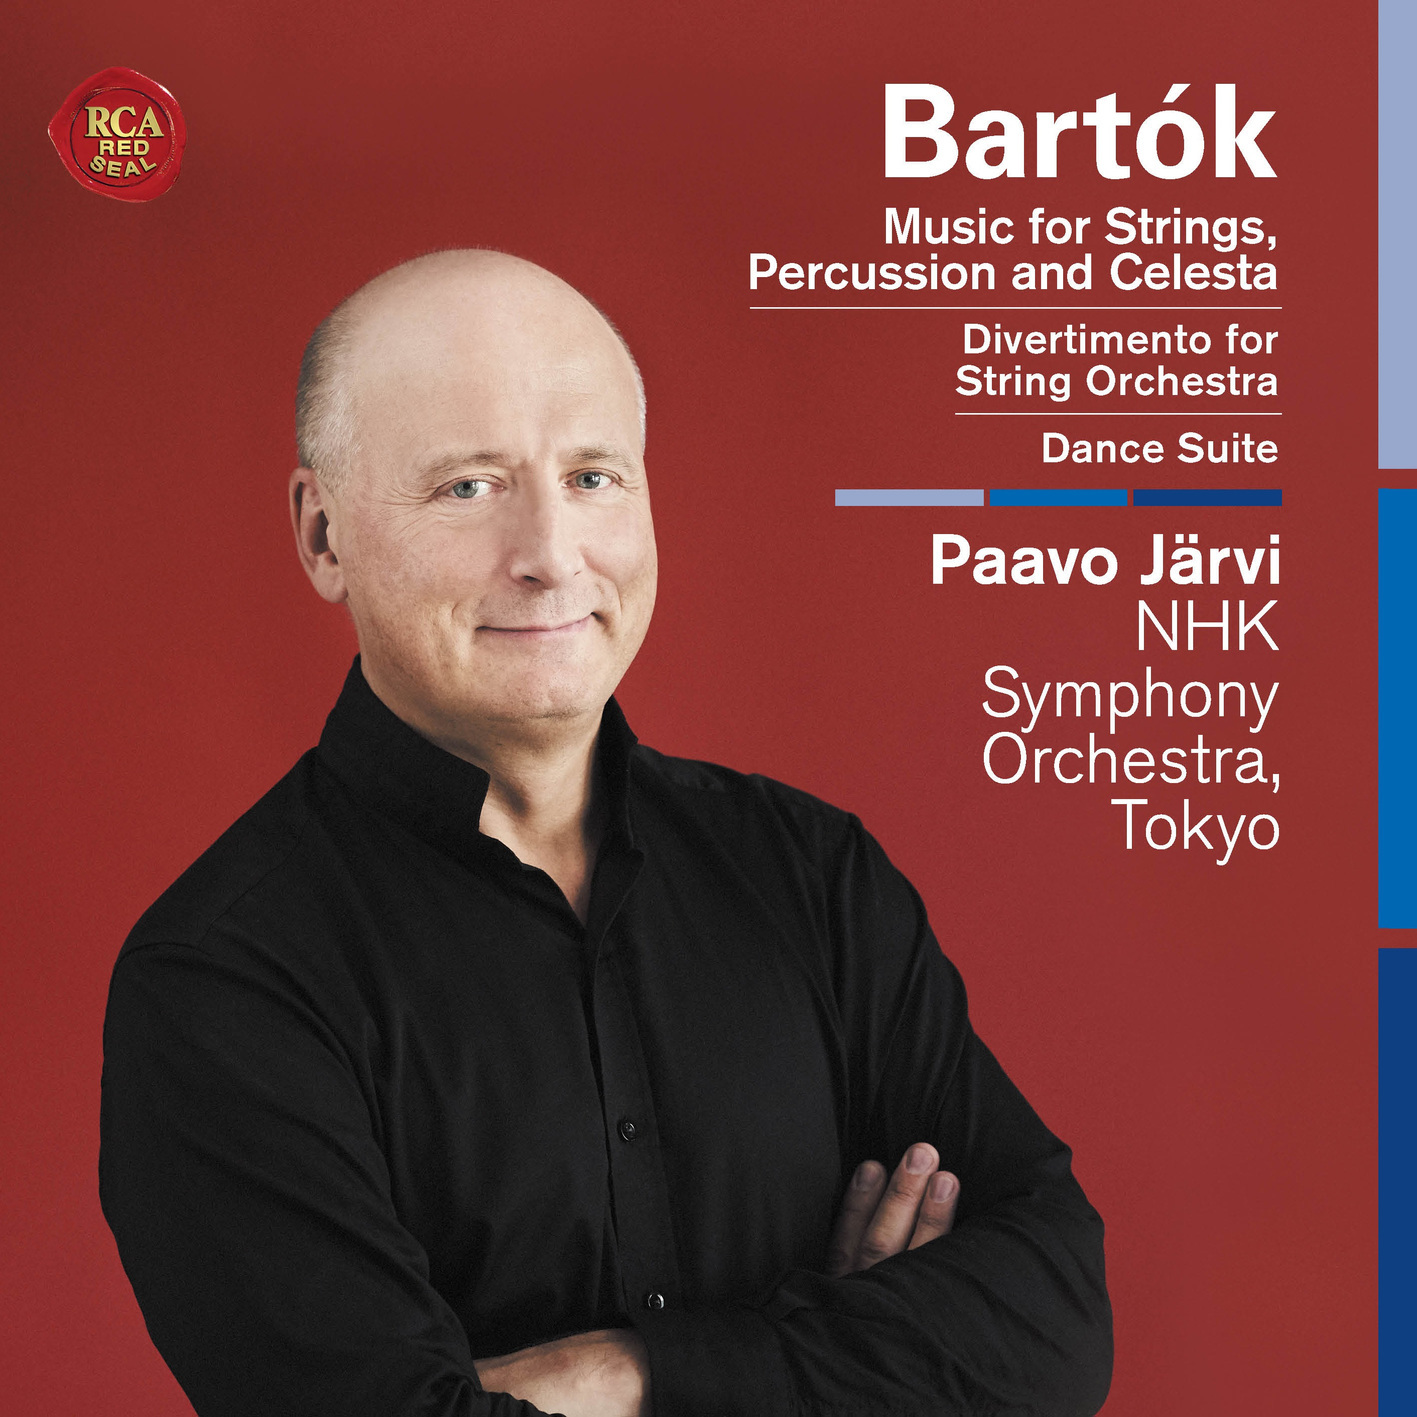 Paavo Jarvi, NHK SO - Bartok: Music for Strings, Percussion and Celesta, and more (2019) [Mora DSF DSD64/2.82MHz + FLAC 24bit/96kHz]